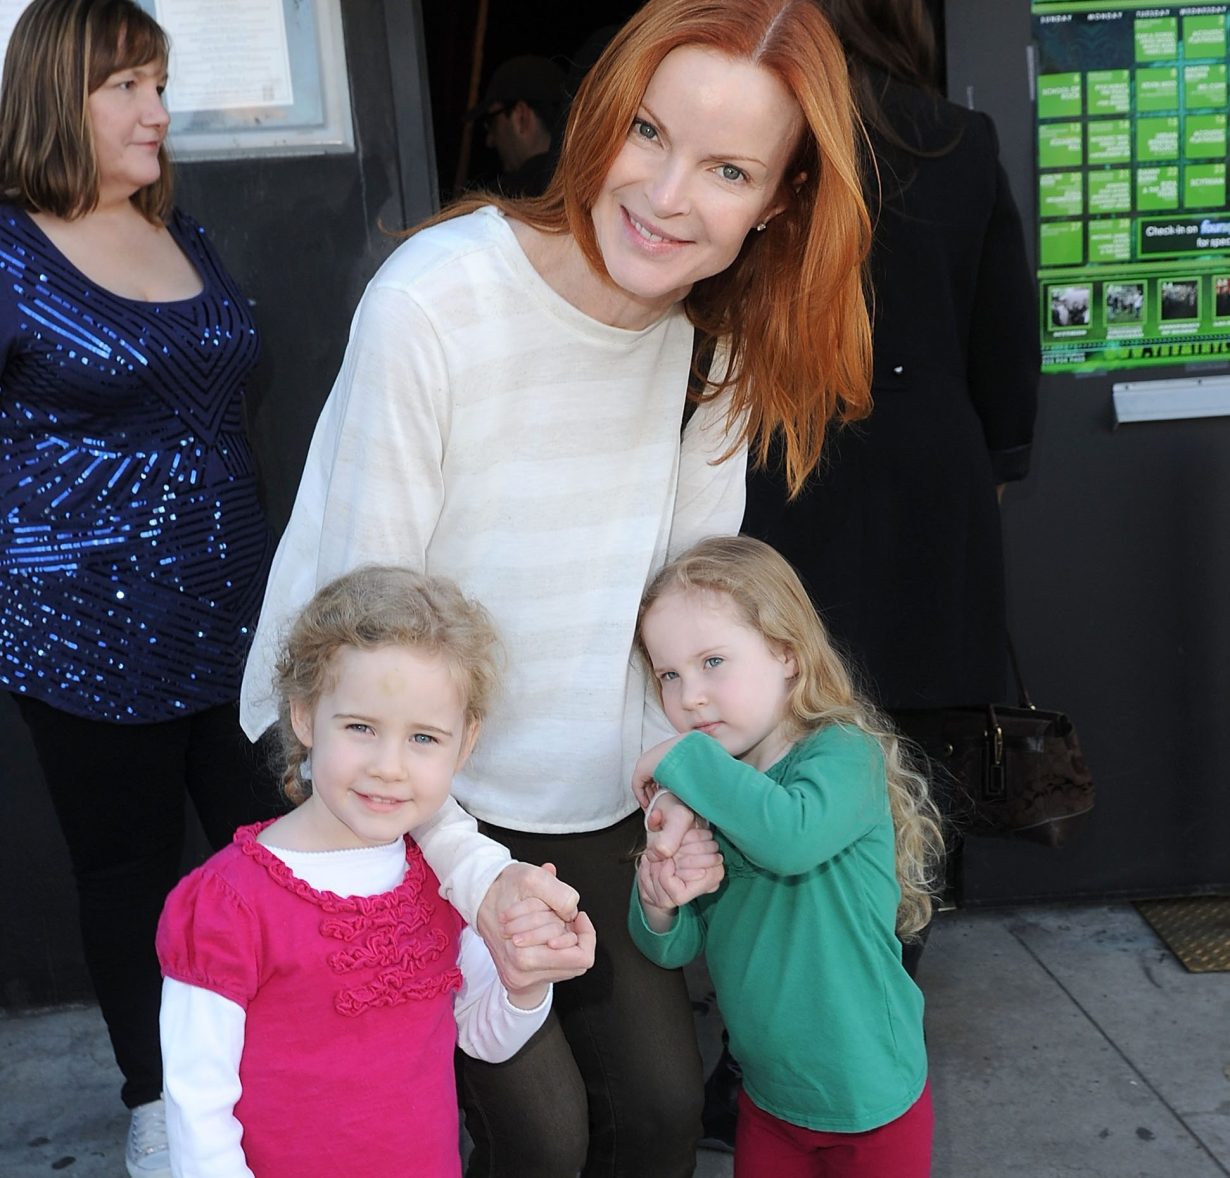 (EXCLUSIVE, Premium Rates Apply) Actress Marcia Cross and her two daughters Eden and Savannah arrive at the Grammy nominees for Children's Music Spoken Word benefit for Mr. Holland's Opus Foundation at The Mint on February 12, 2011 in Los Angeles, California.